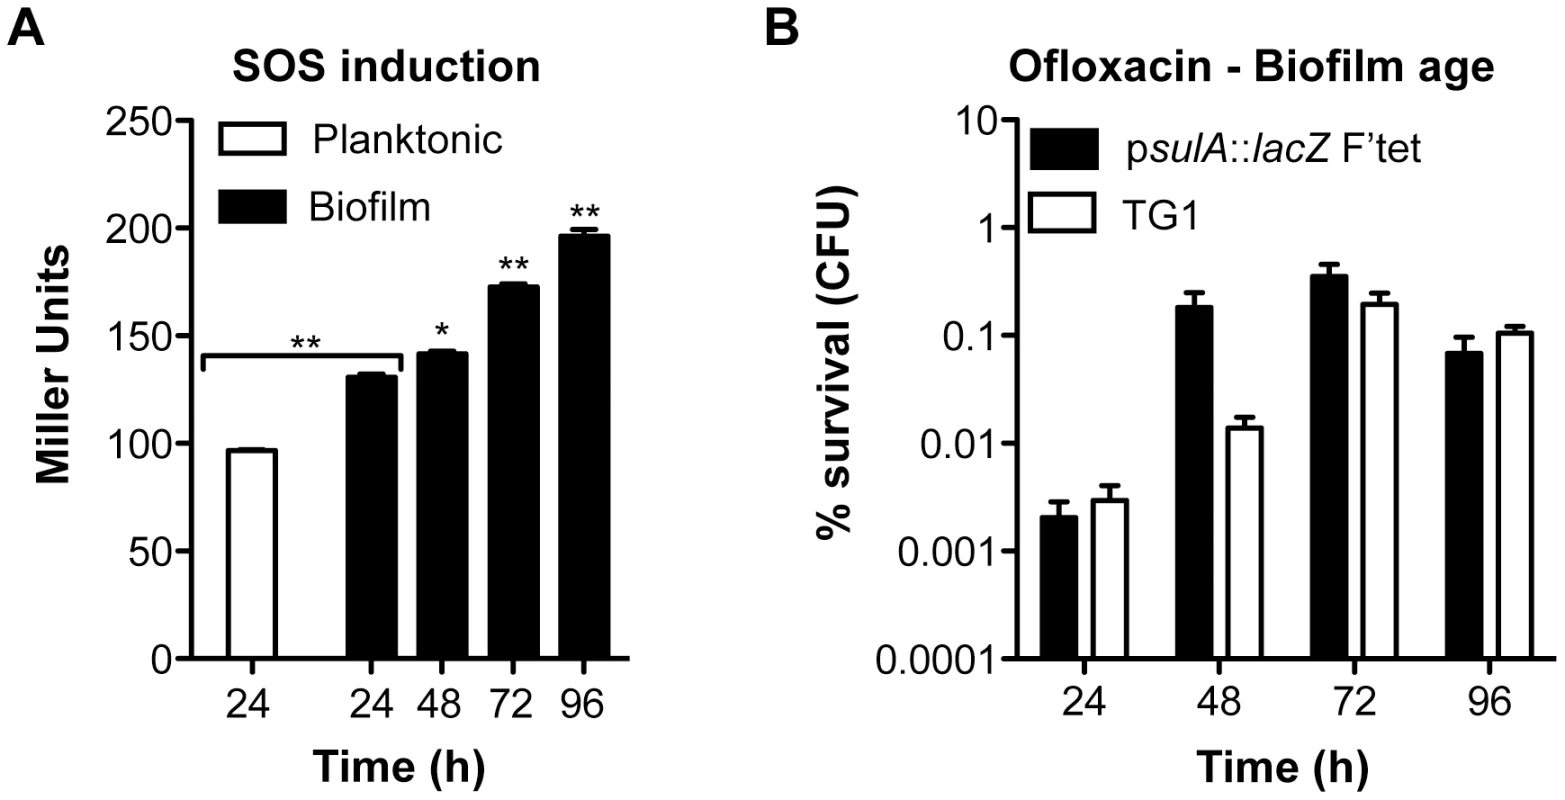 Induction of the SOS response and ofloxacin tolerance in aging biofilms.